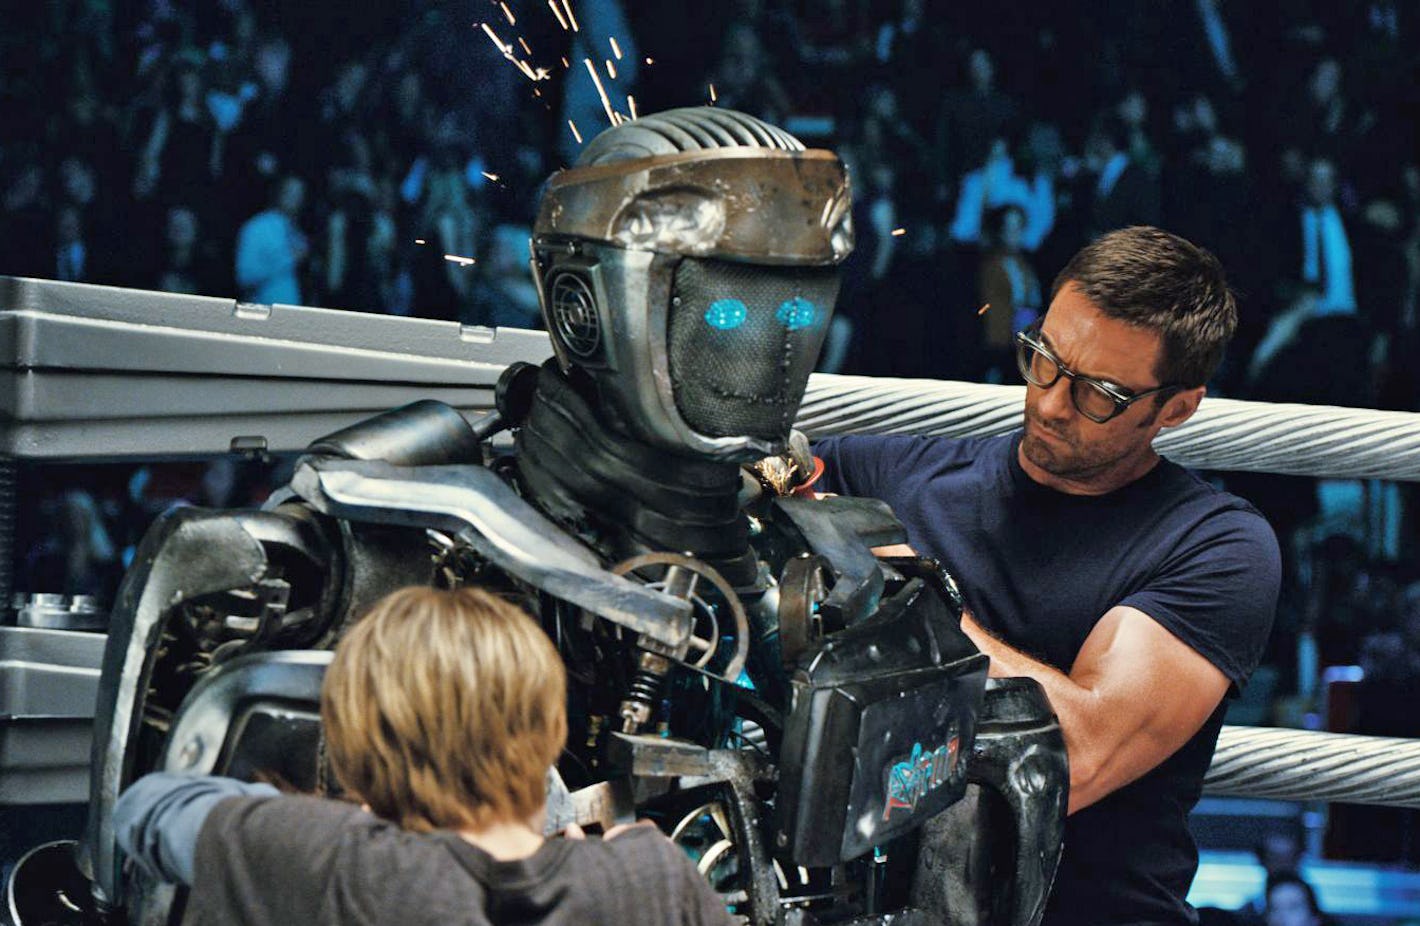 'Real Steel' on Netflix is the uplifting scifi movie you need right now